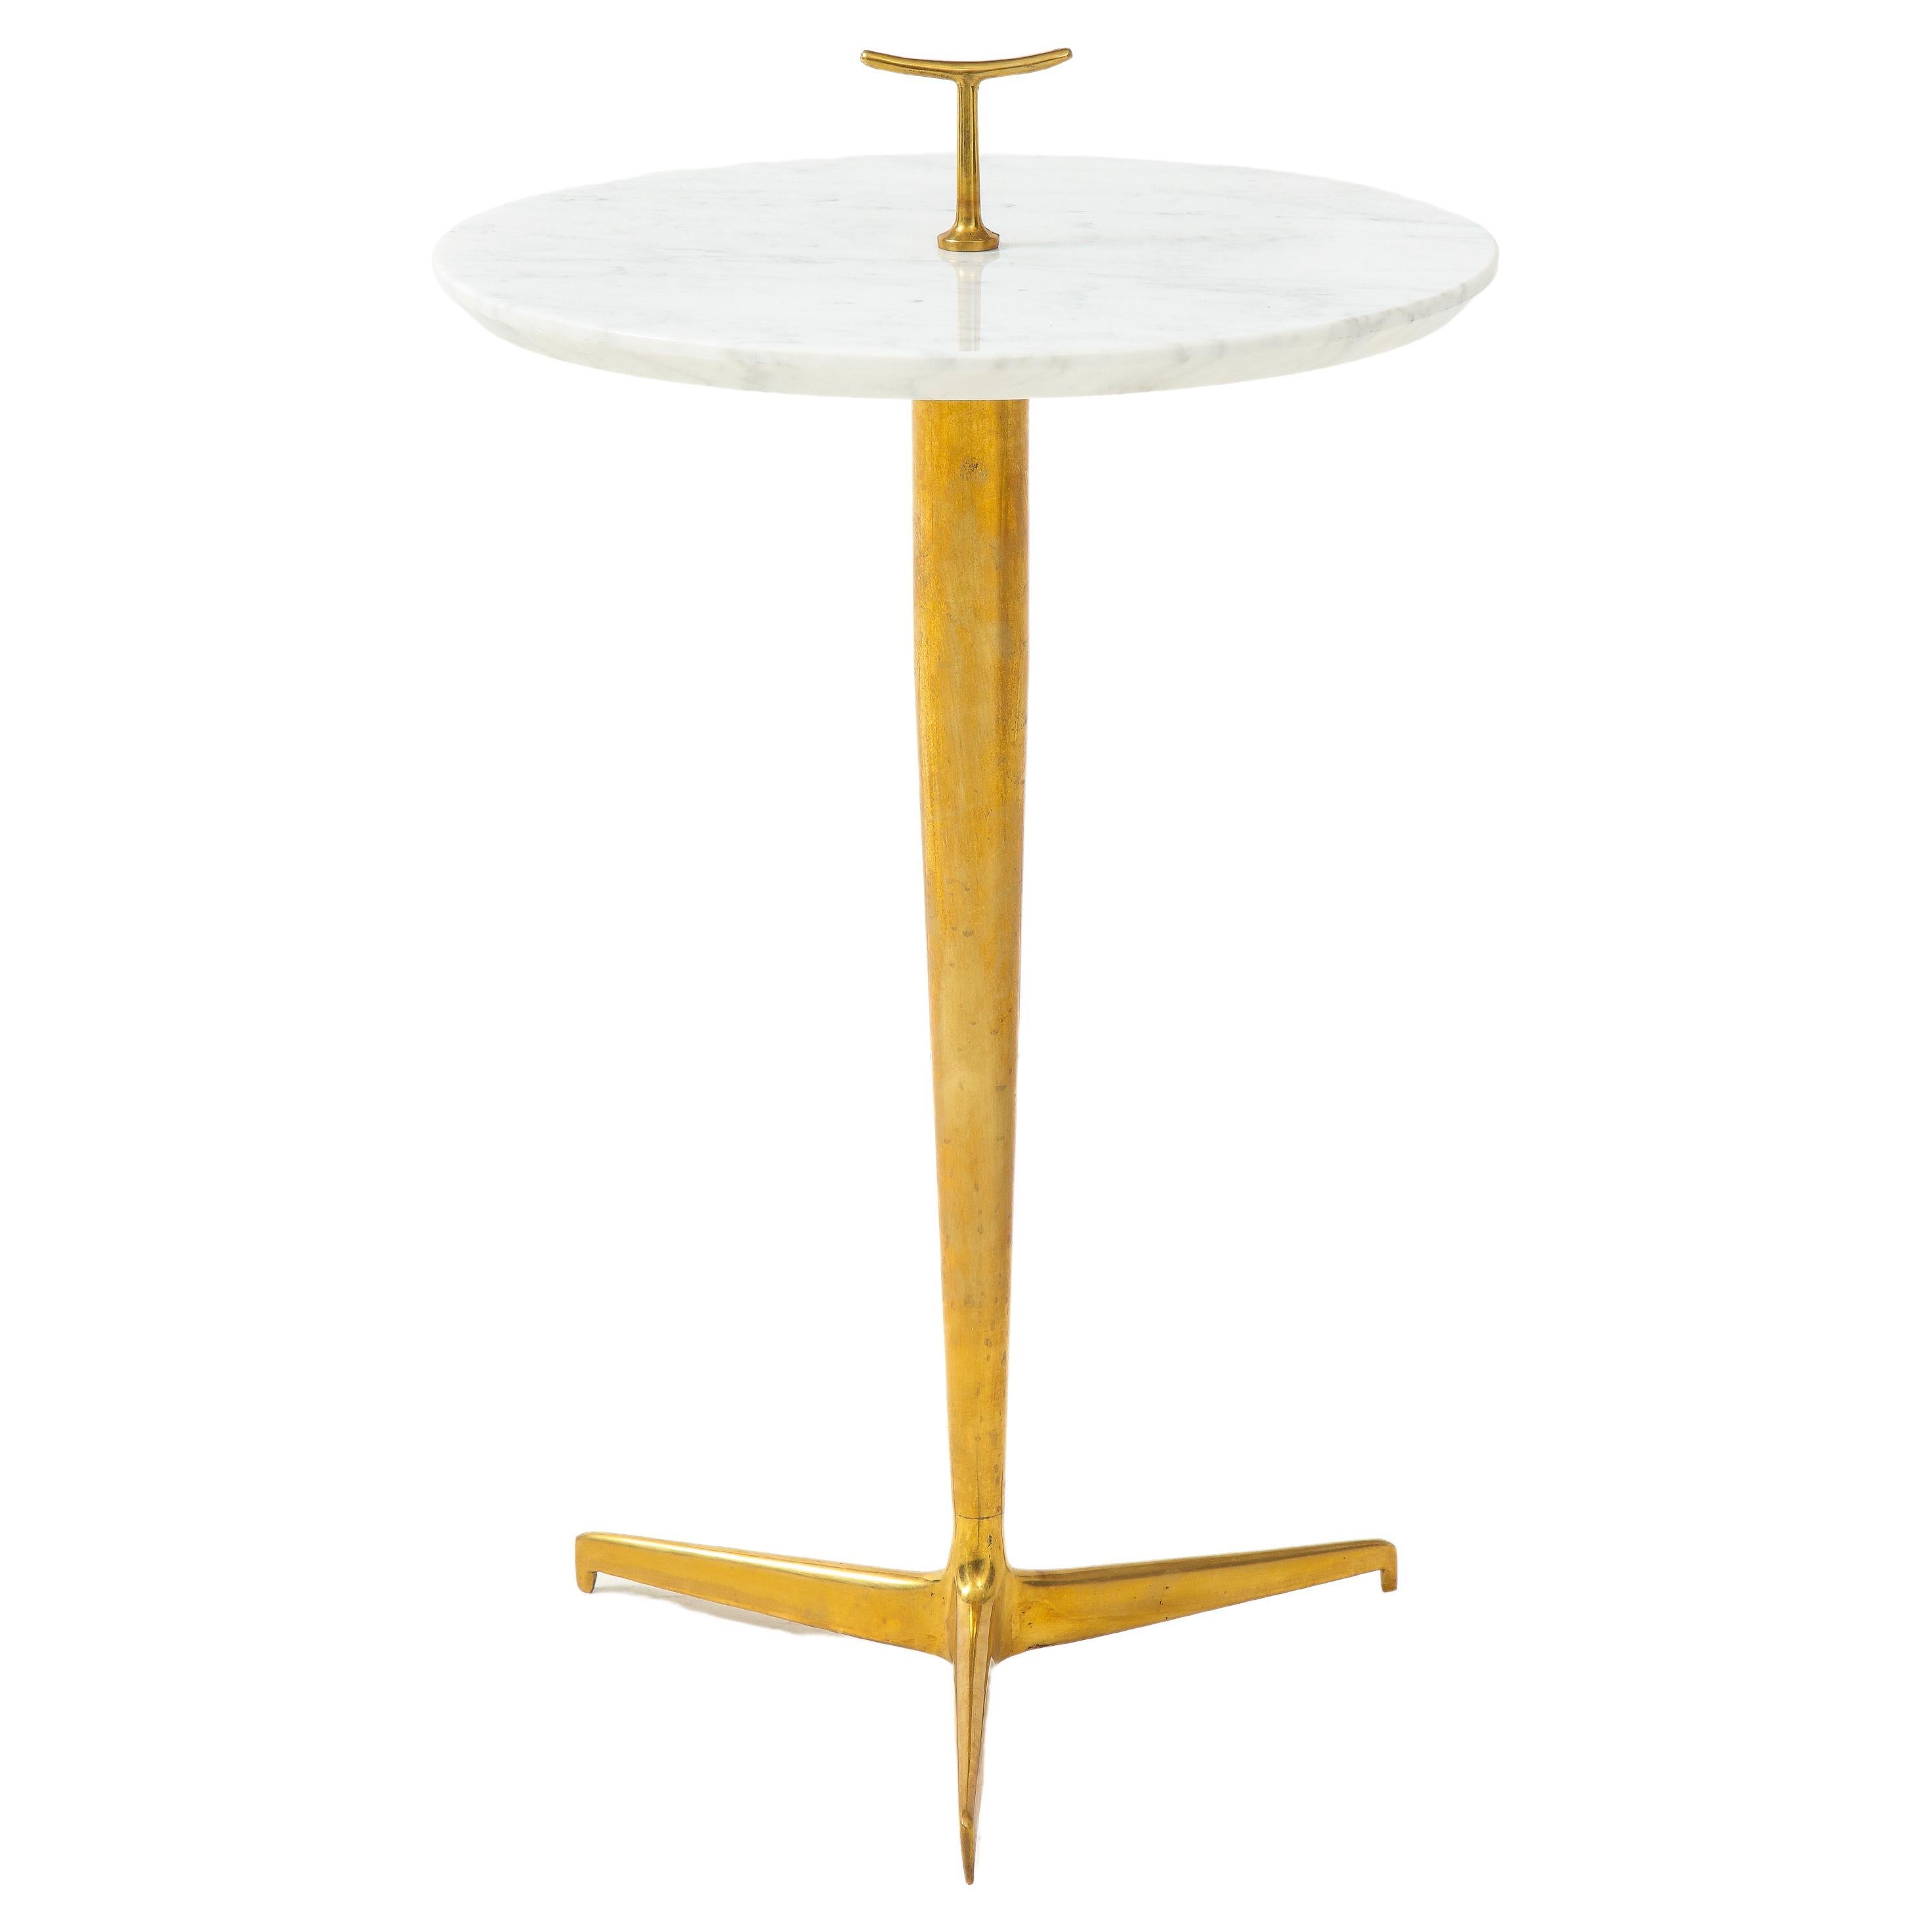 Contemporary pair of side or drinks tables each with thick Carrara marble with small brass handle detail on patinated brass tripod base, Italy, 2022. This chic modern side table is beautifully constructed with thick reverse rounded Carrara marble